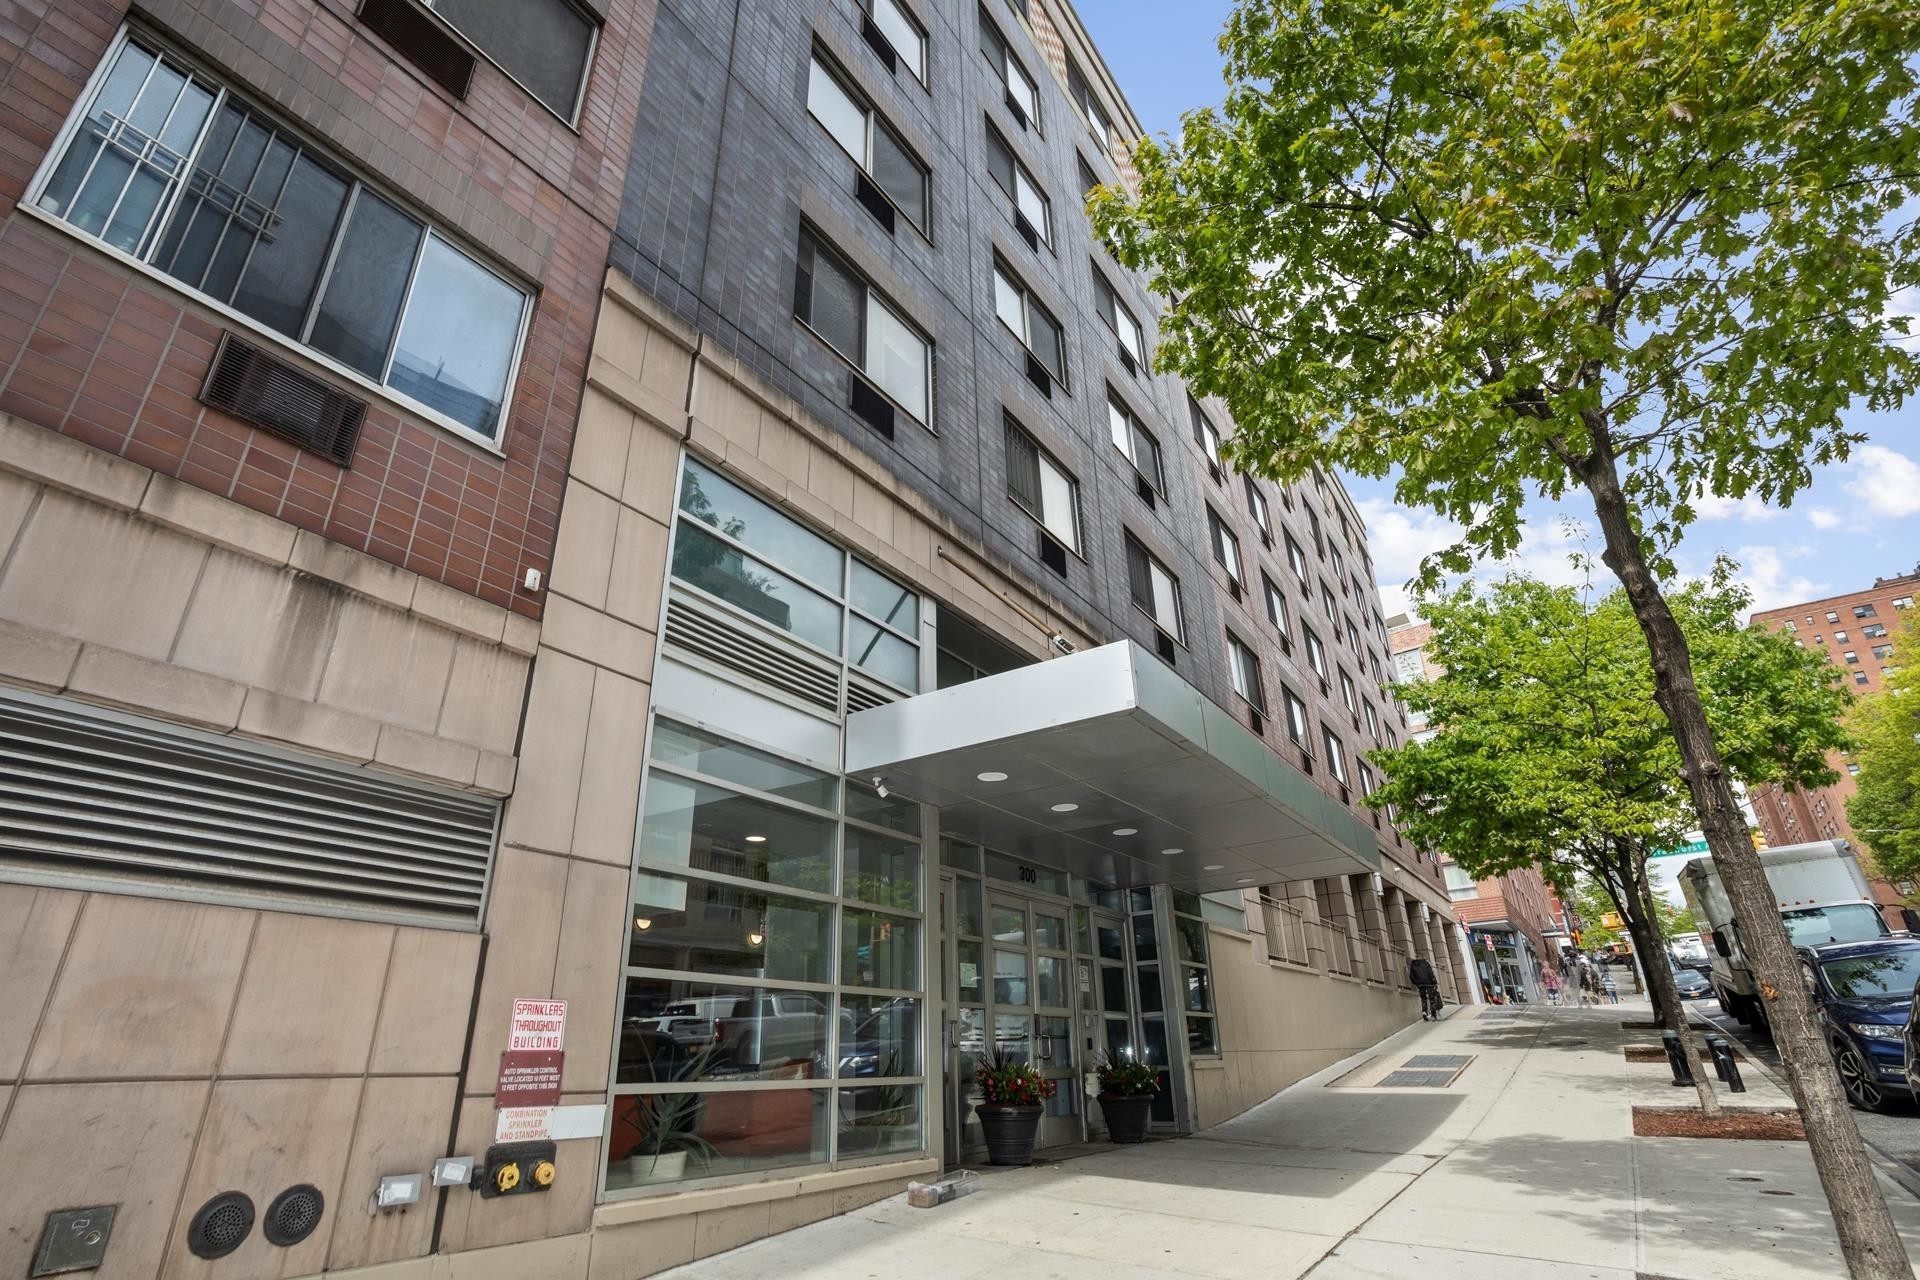 7. Co-op Properties for Sale at Bradhurst Court, 300 W 145TH ST, 4A Central Harlem, New York, New York 10030